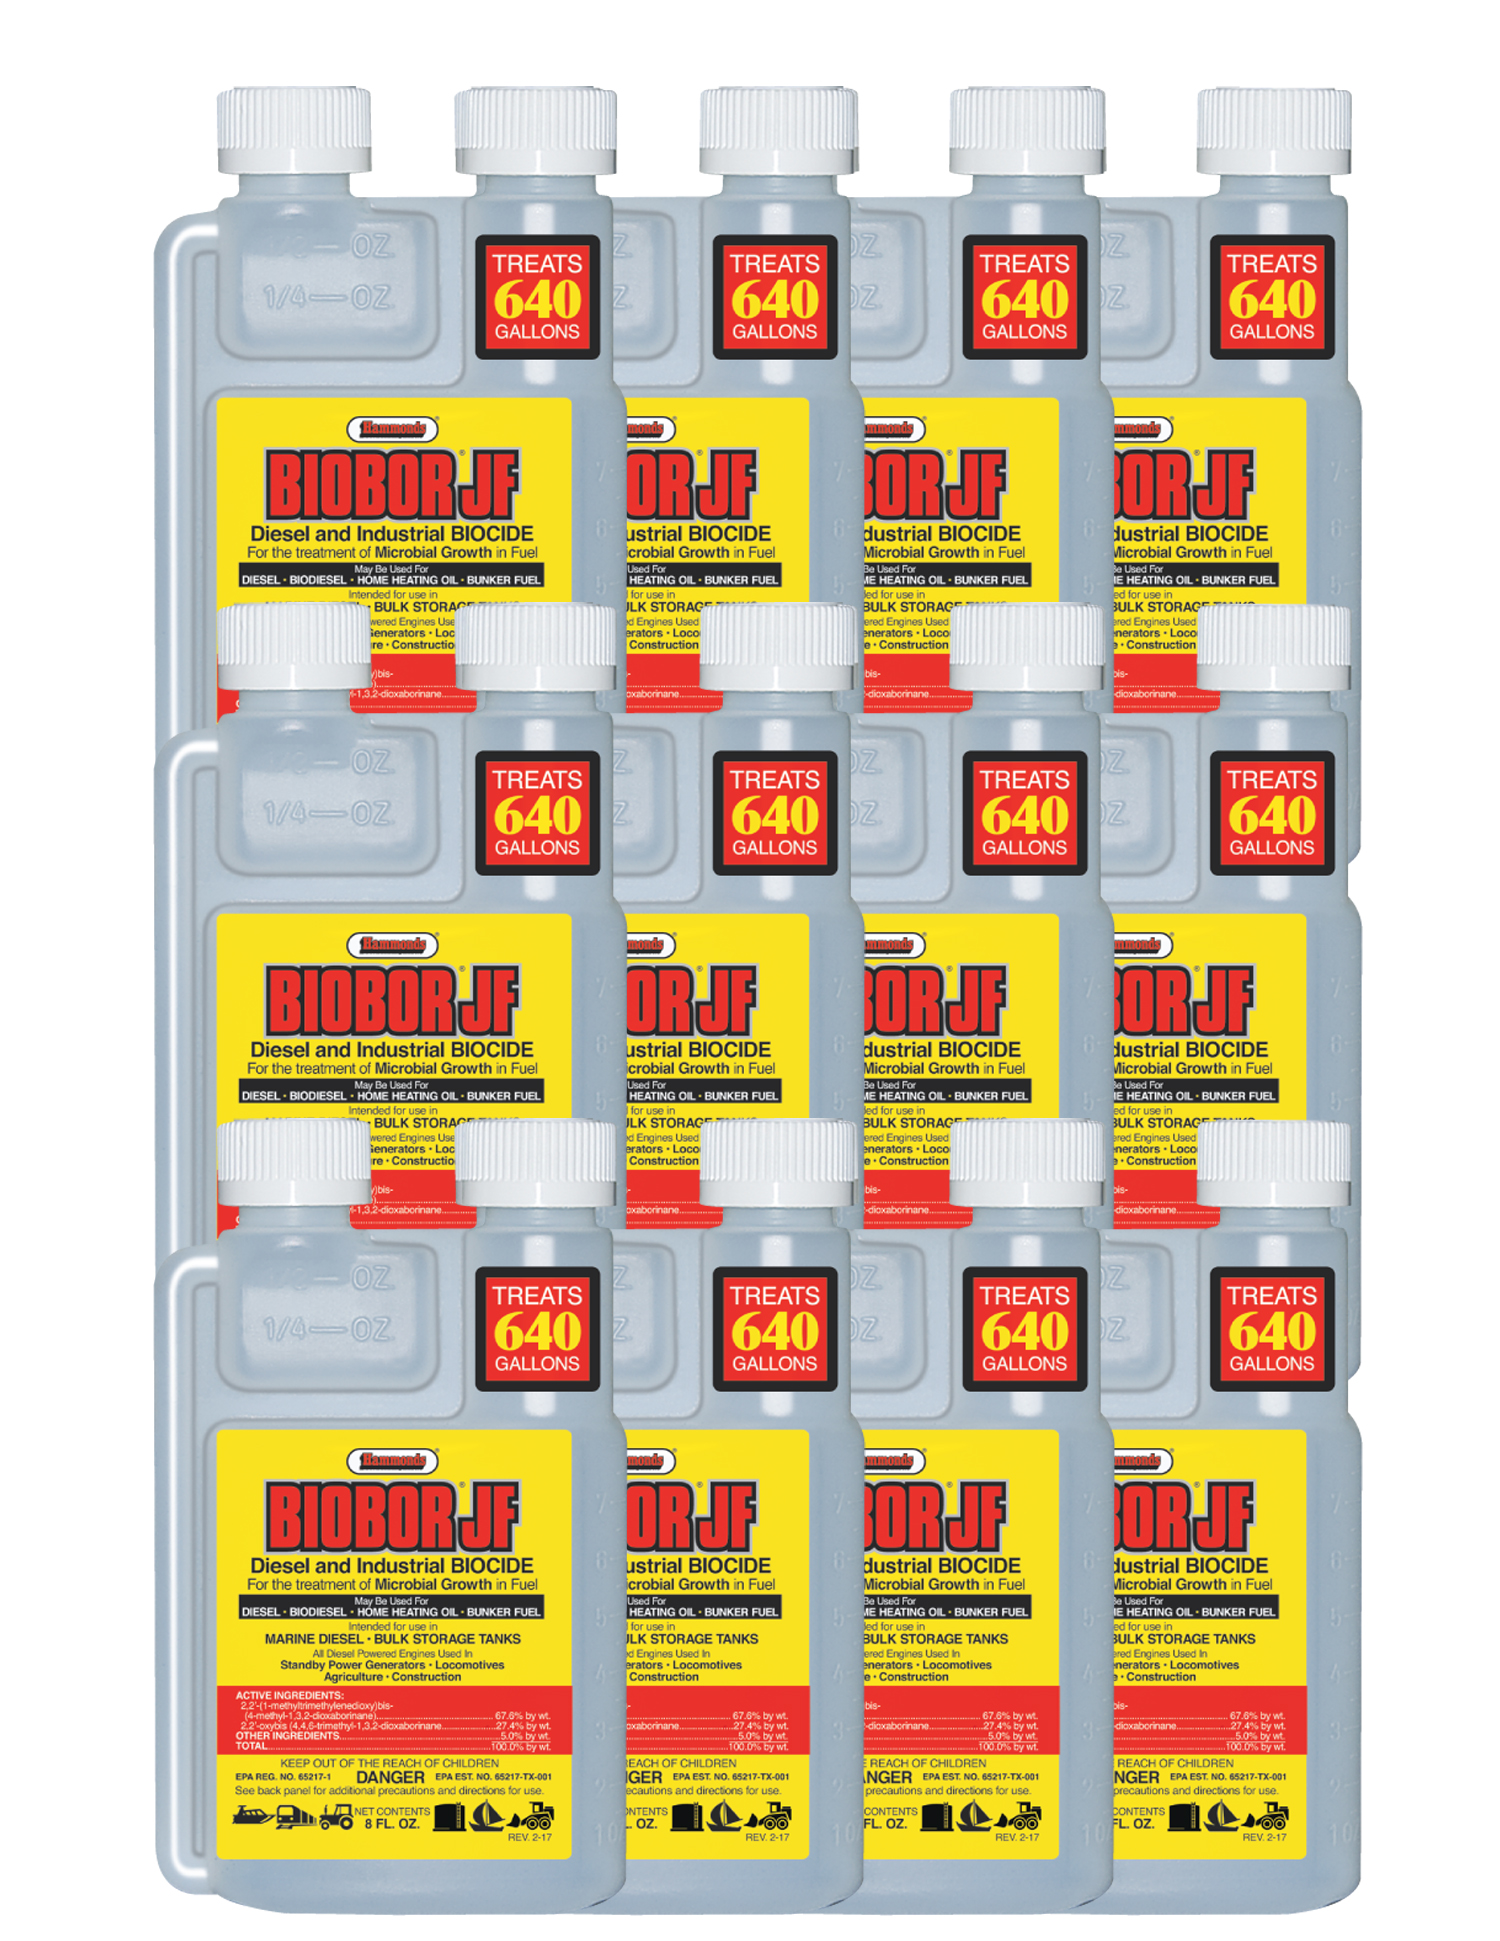 Biobor JF 8 oz. (12 Pack) Diesel Biocide and Lubricity Additive Image